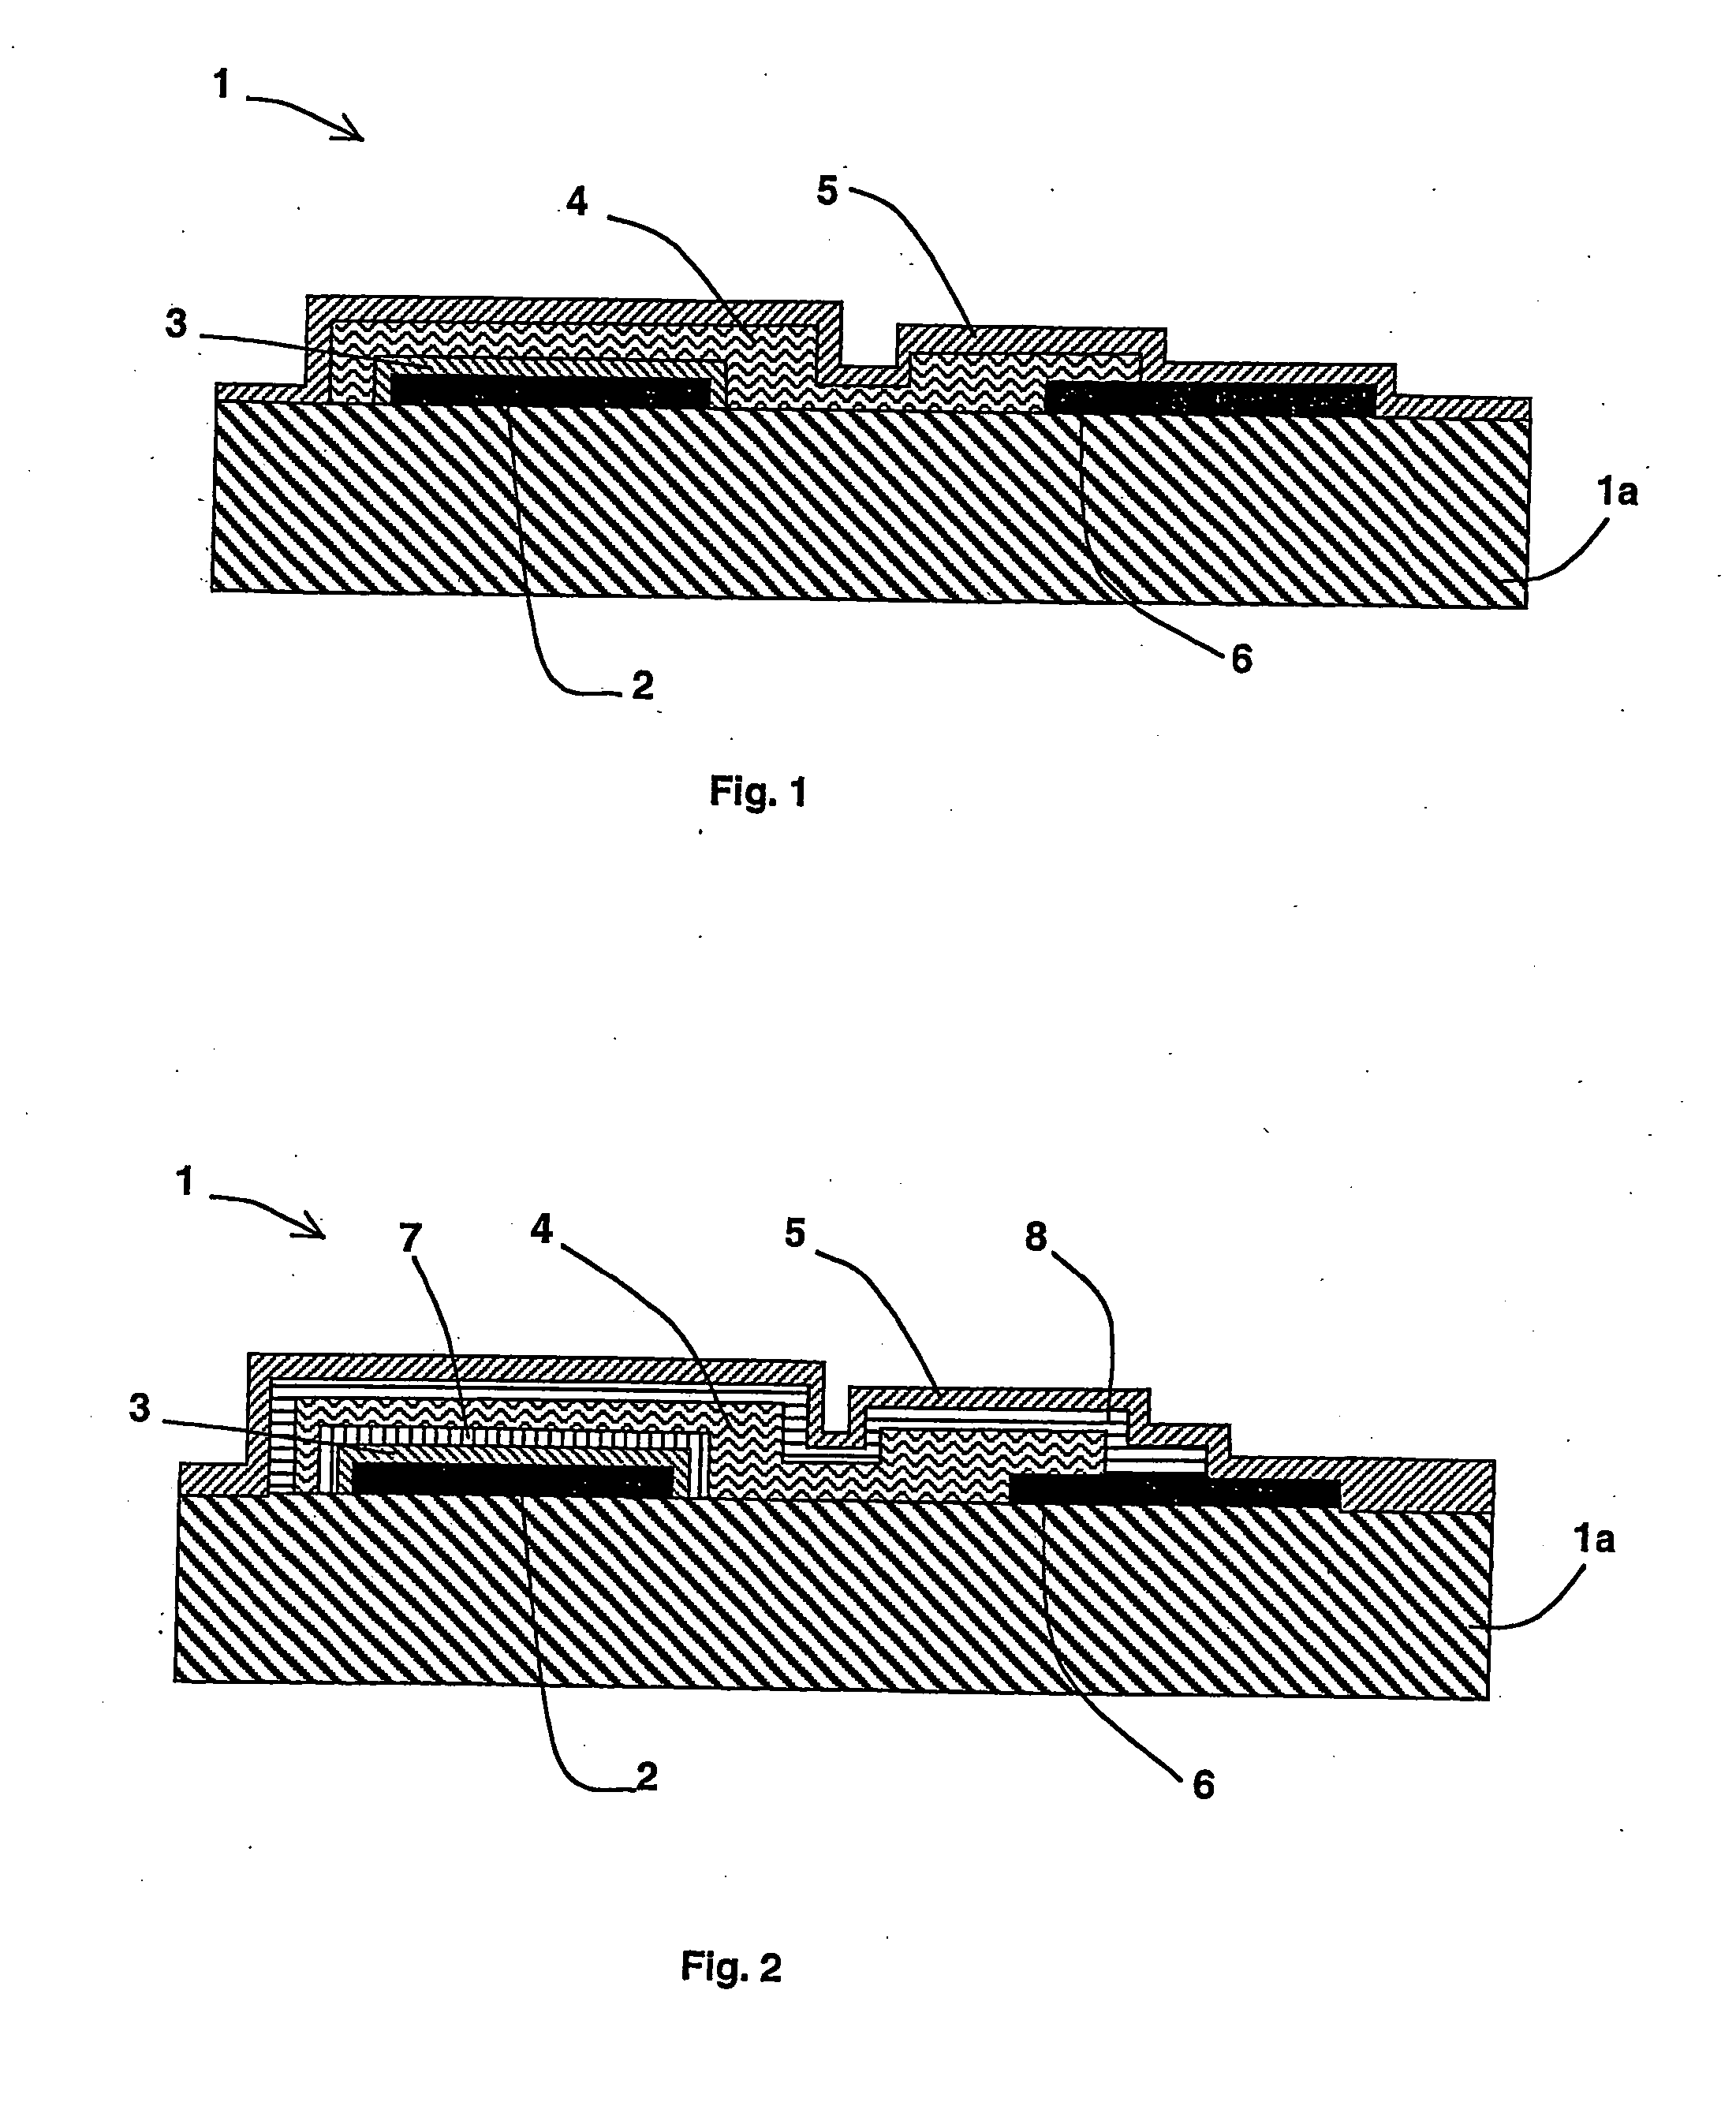 Microbattery with at least one electrode and electrolyte each comprising a common grouping (xy1y2y3y4) and method for production of said microbattery